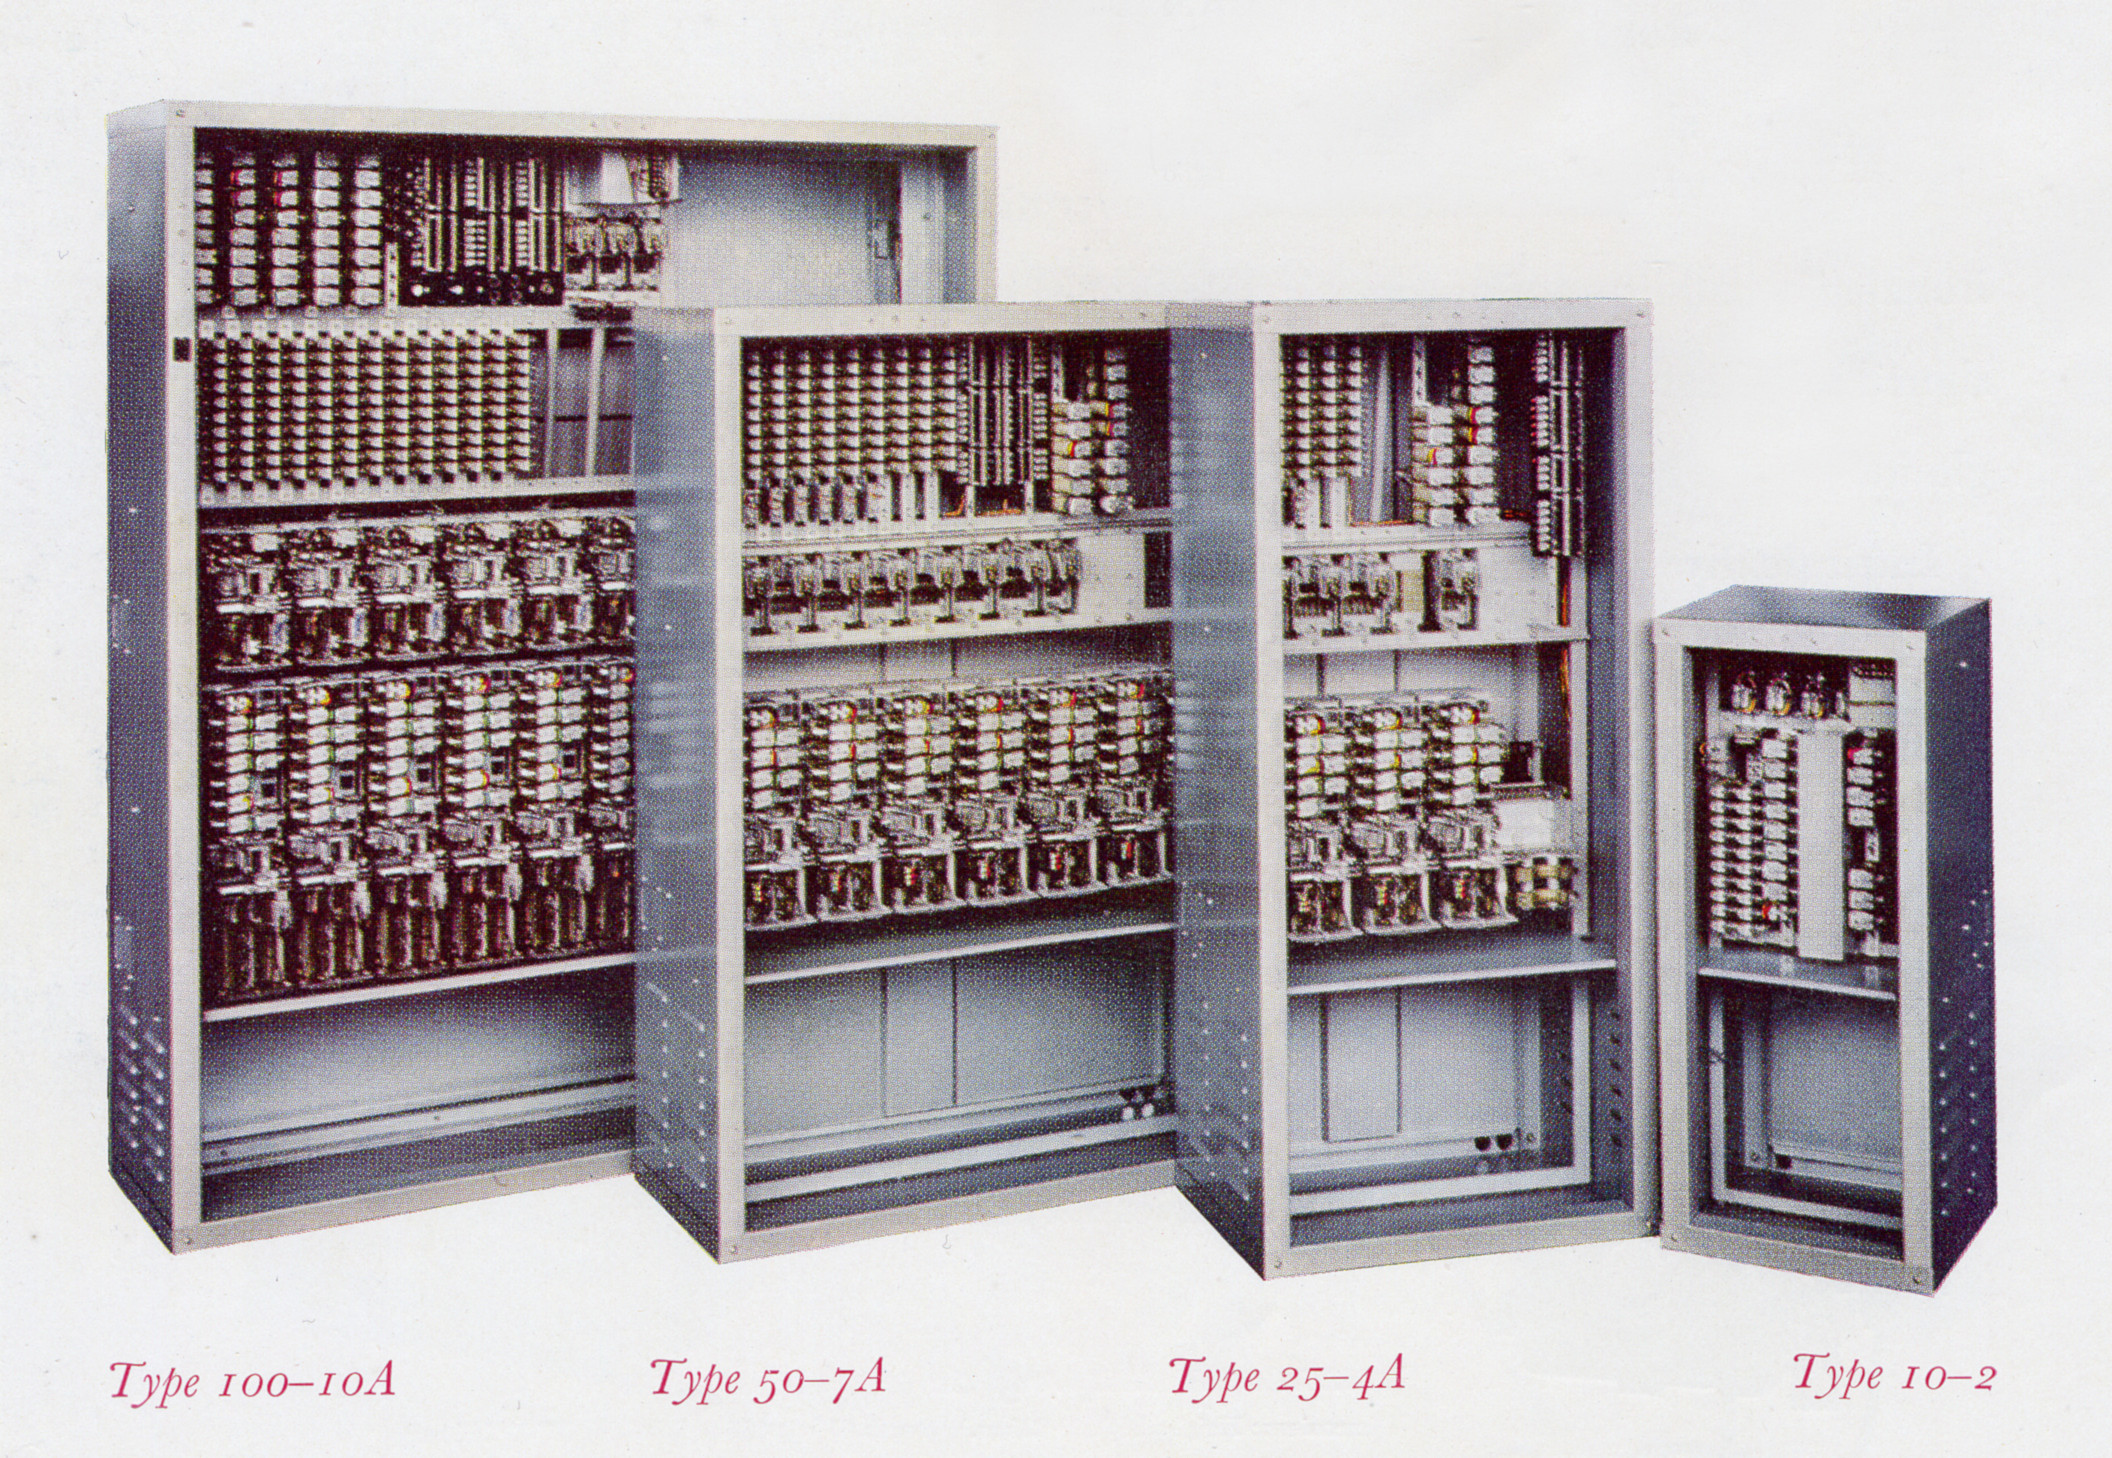 Catalogue image showing a selection of electromechanical exchange cabinets of various sizes